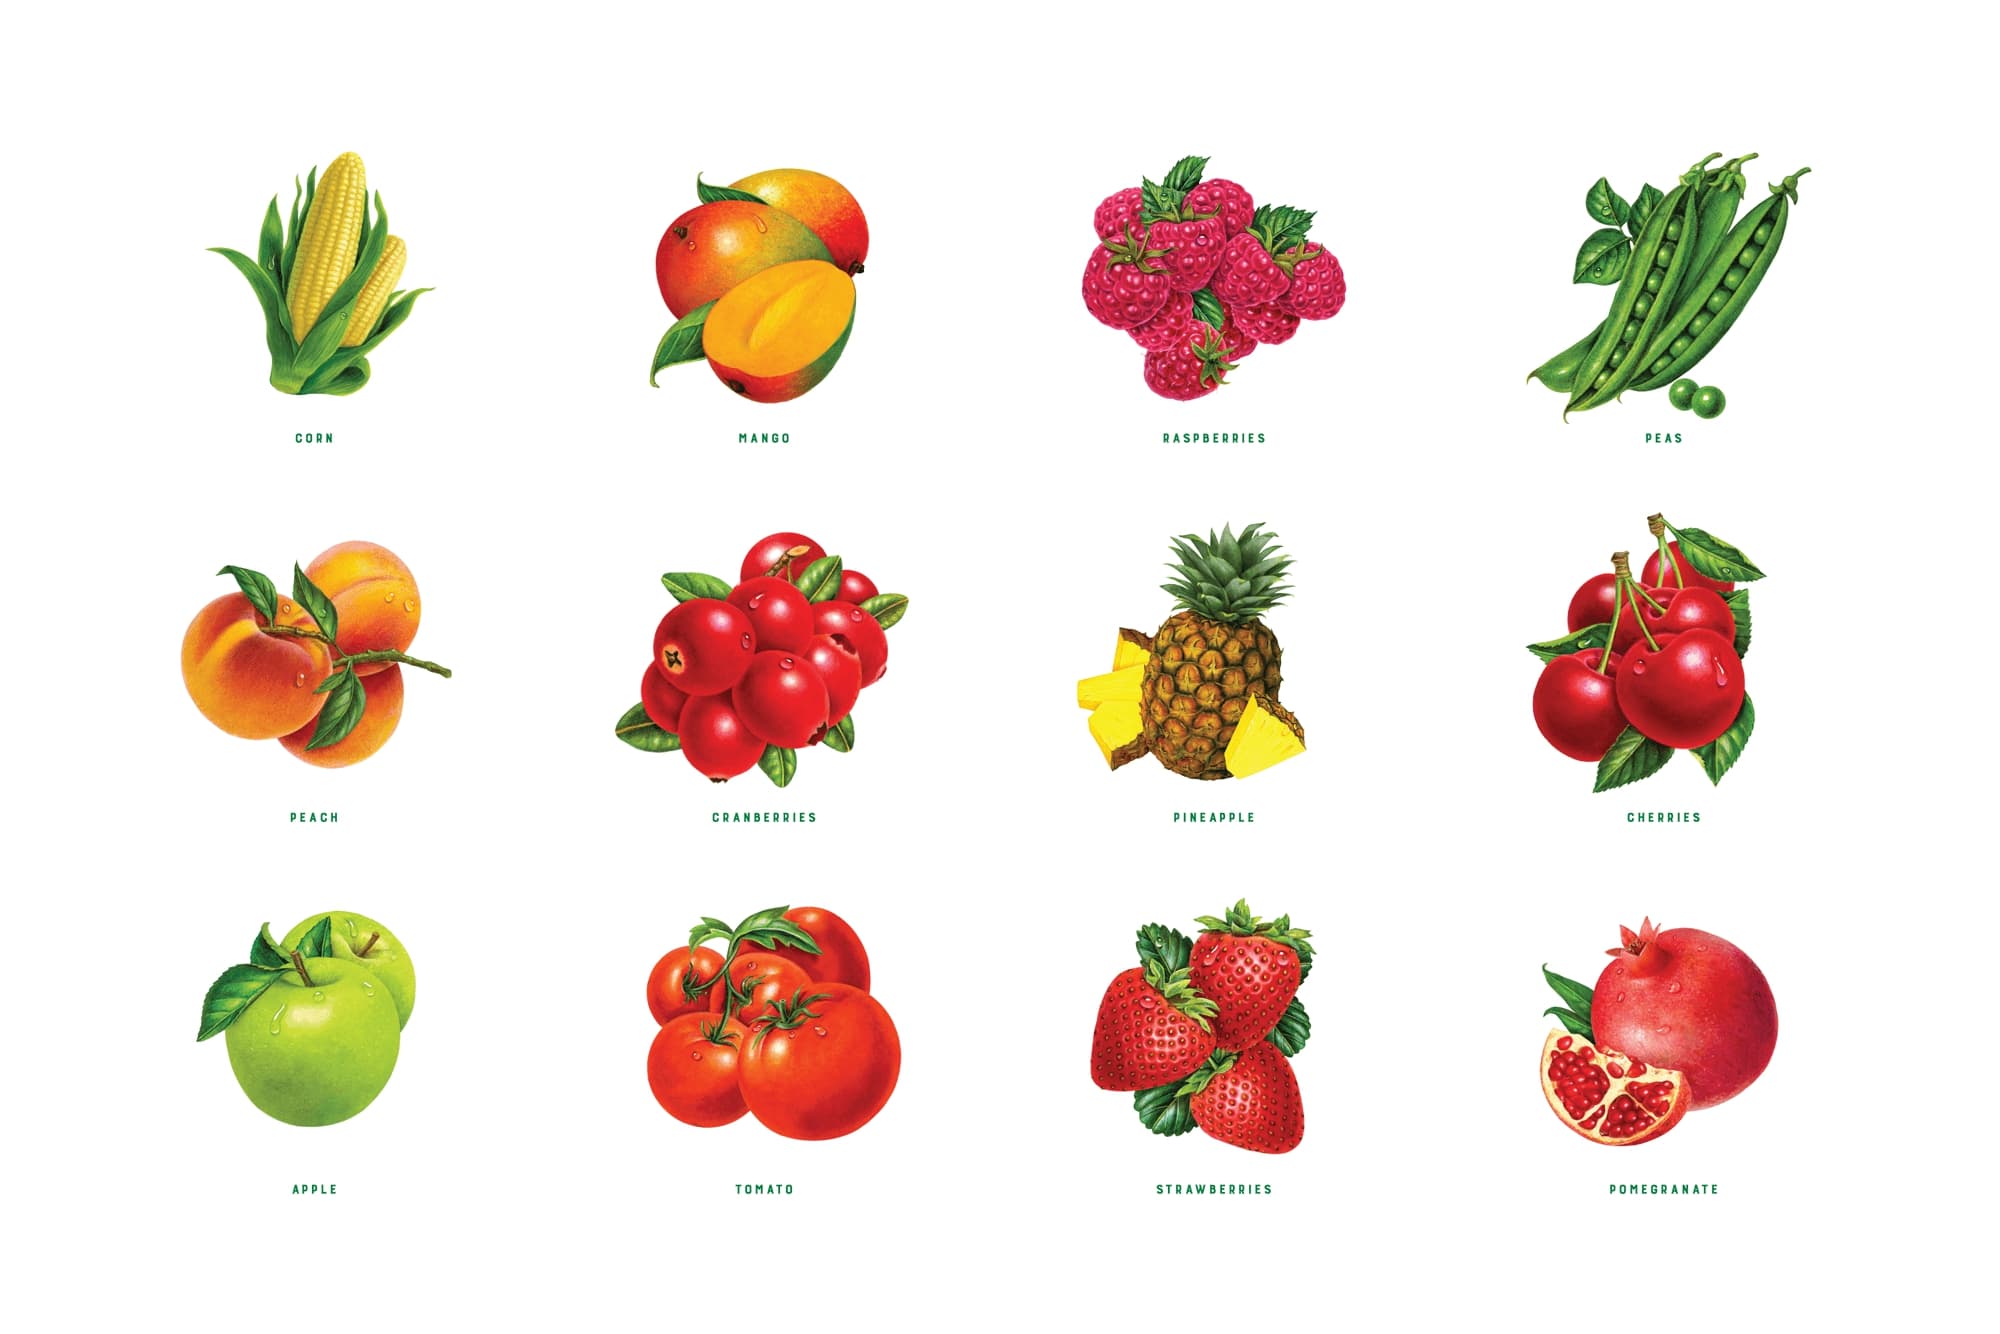 Photorealistic illustrations of California produce by Judy Unger.